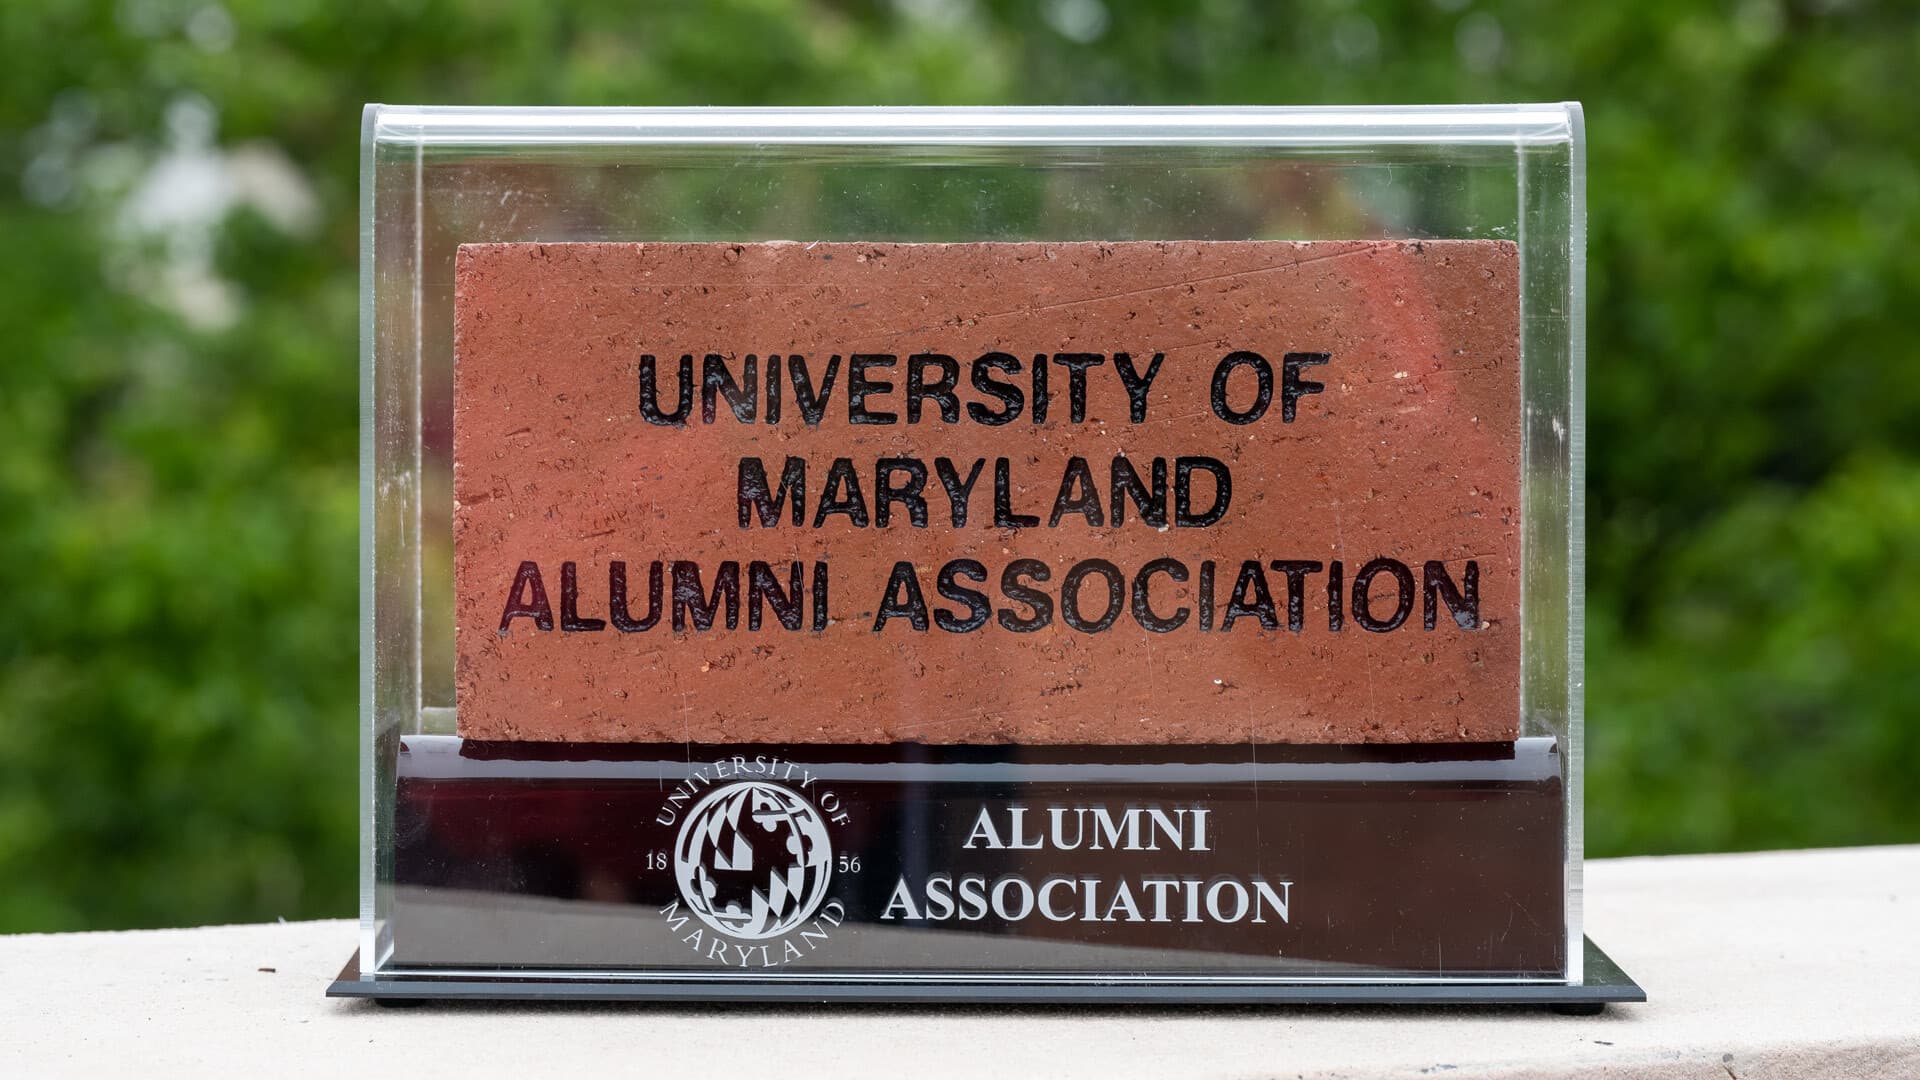 University of Maryland Alumni Association personalized brick in a display case.